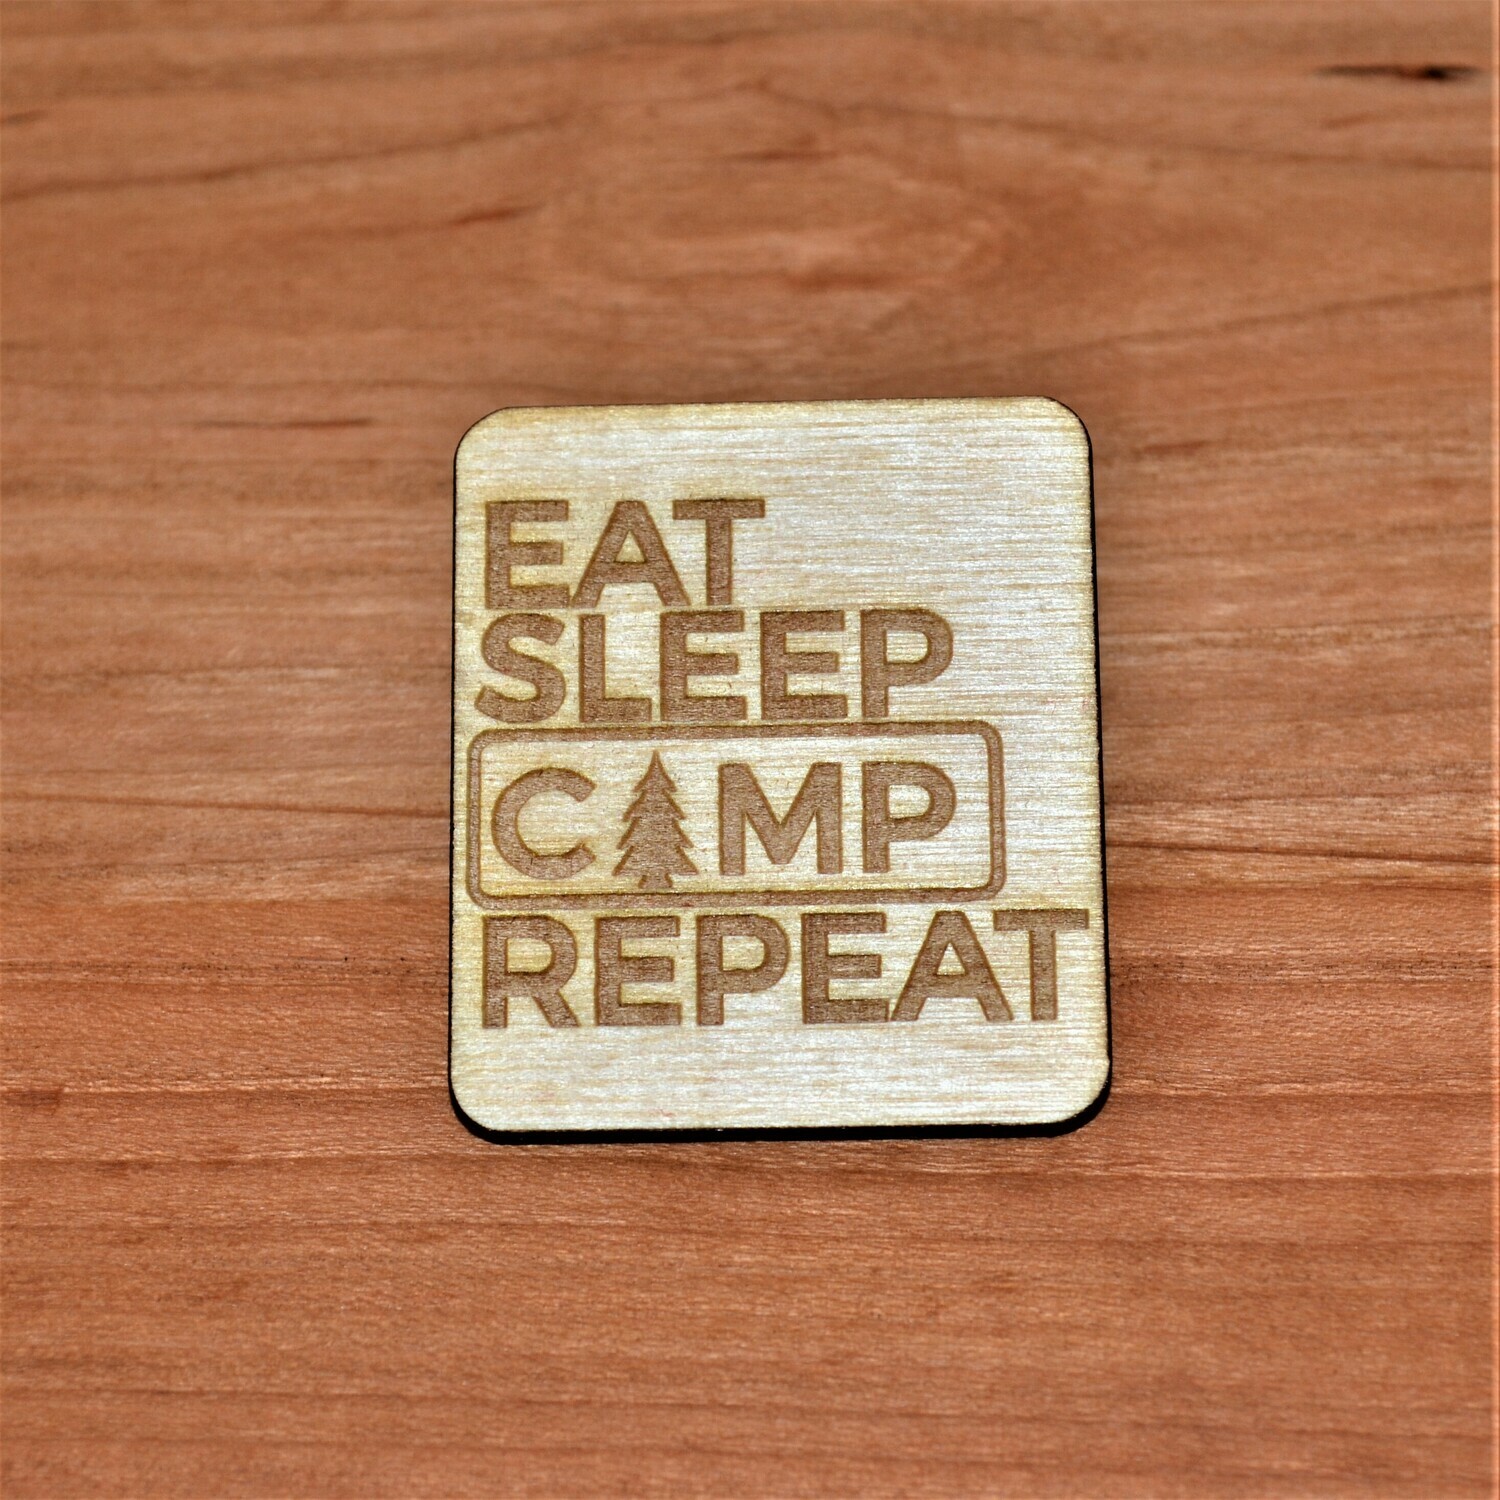 EAT SLEEP CAMP REPEAT Wooden Magnet